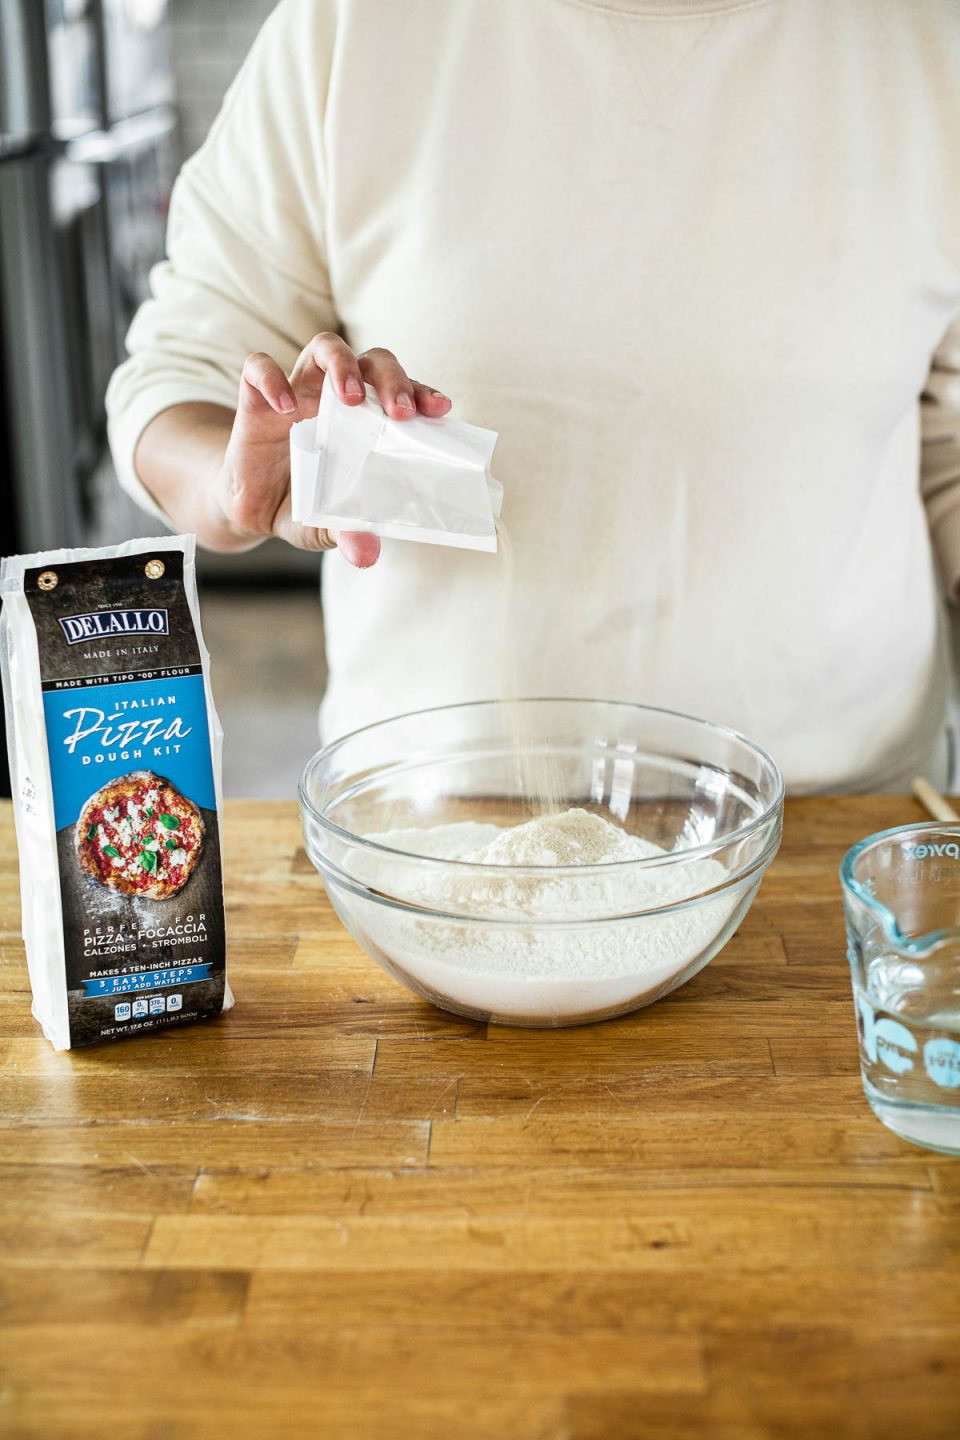 Mixing DeLallo Pizza Dough Kit: Jess, shown in a white sweatshirt, stands behind a butcher block counter, yeast packet into a mixing bowl with flour in it. Sitting next to the bowl on the counter are a wooden spoon & a package of DeLallo Pizza Dough Kit.